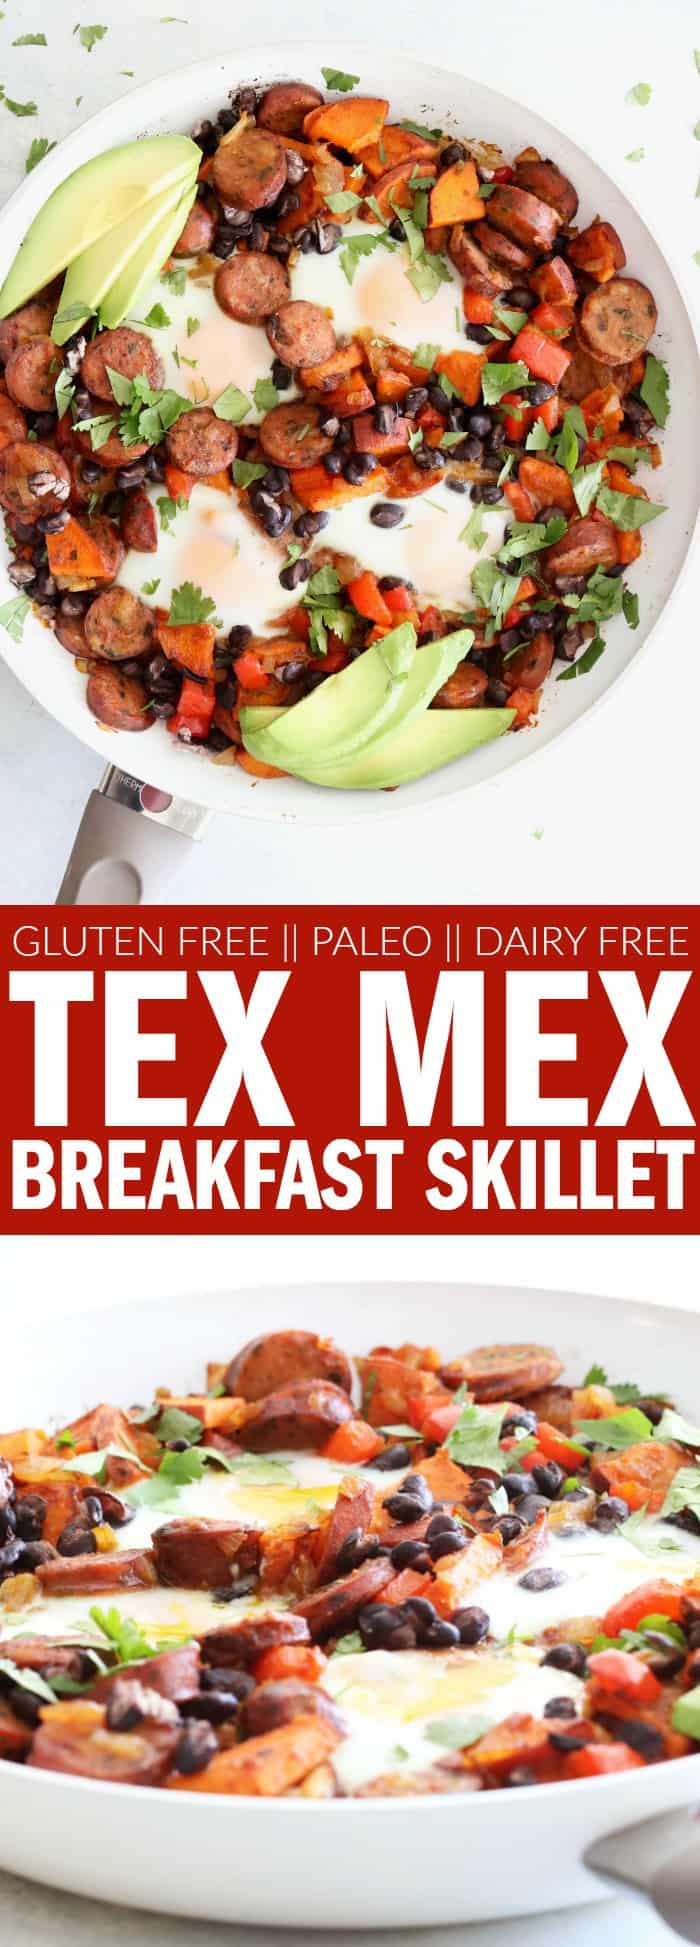 This Tex Mex Breakfast Skillet is such a fun way to kick off your weekend!! This gluten free, paleo, and dairy free recipe is a brunch your whole family can love!! thetoastedpinenut.com #glutenfree #paleo #dairyfree #texmex #breakfast #skillet #eggs #hash #vegetables